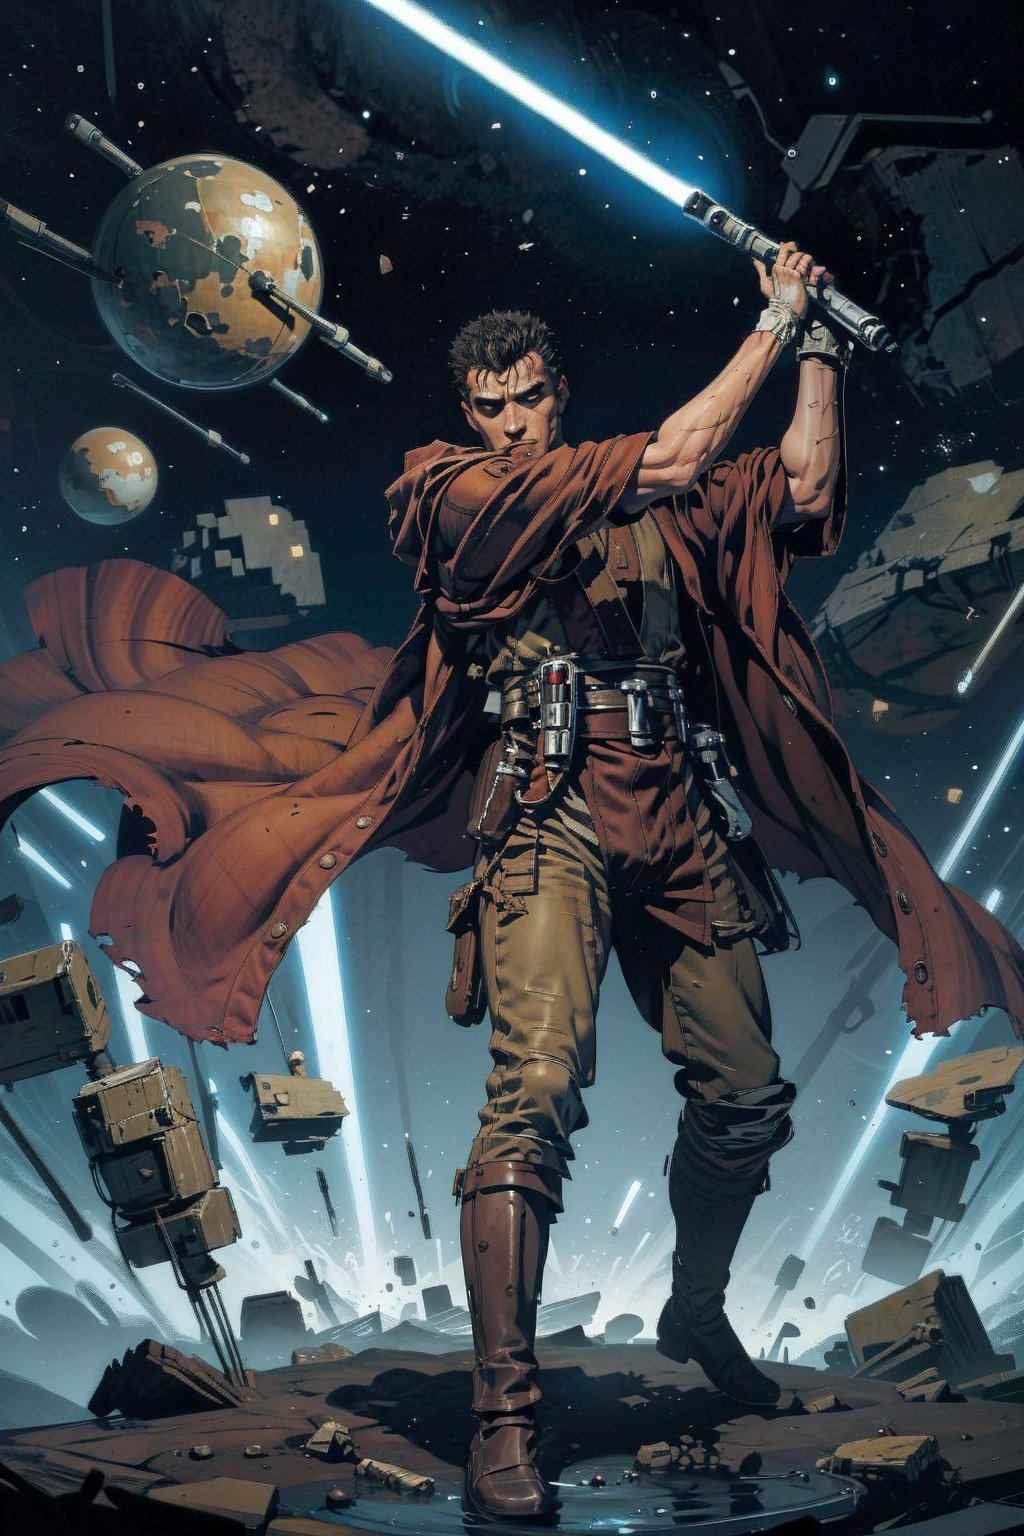 1 man, image of a mature man who looks like "Guts" from Berserk in Jedi robes holding a purple lightsaber in his right hand, mature, 35 years old, short hair, in jedioutfit, torn clothes, correctly wielding a lightsaber, light_saber, black dress, cloth pieces, dynamic pose, on a planet with syscrapers